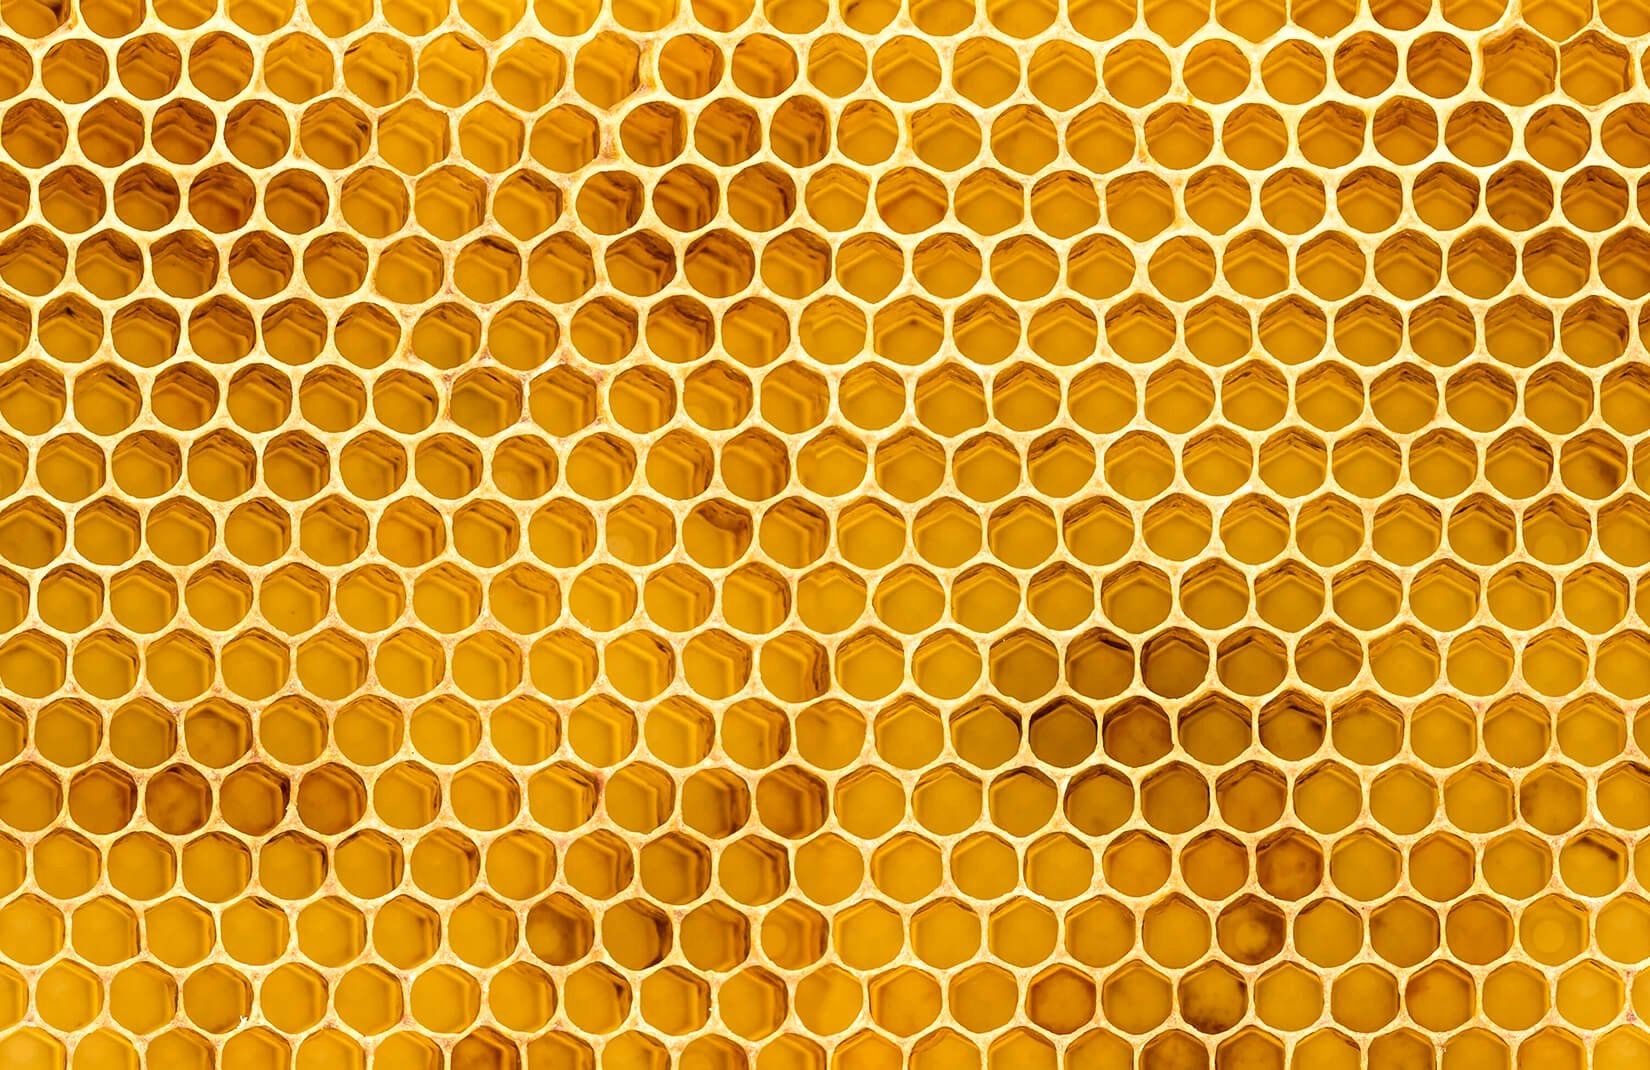 Honeycomb Wallpaper Lovely Honey Bee Hive Wallpaper This Year of The Hudson